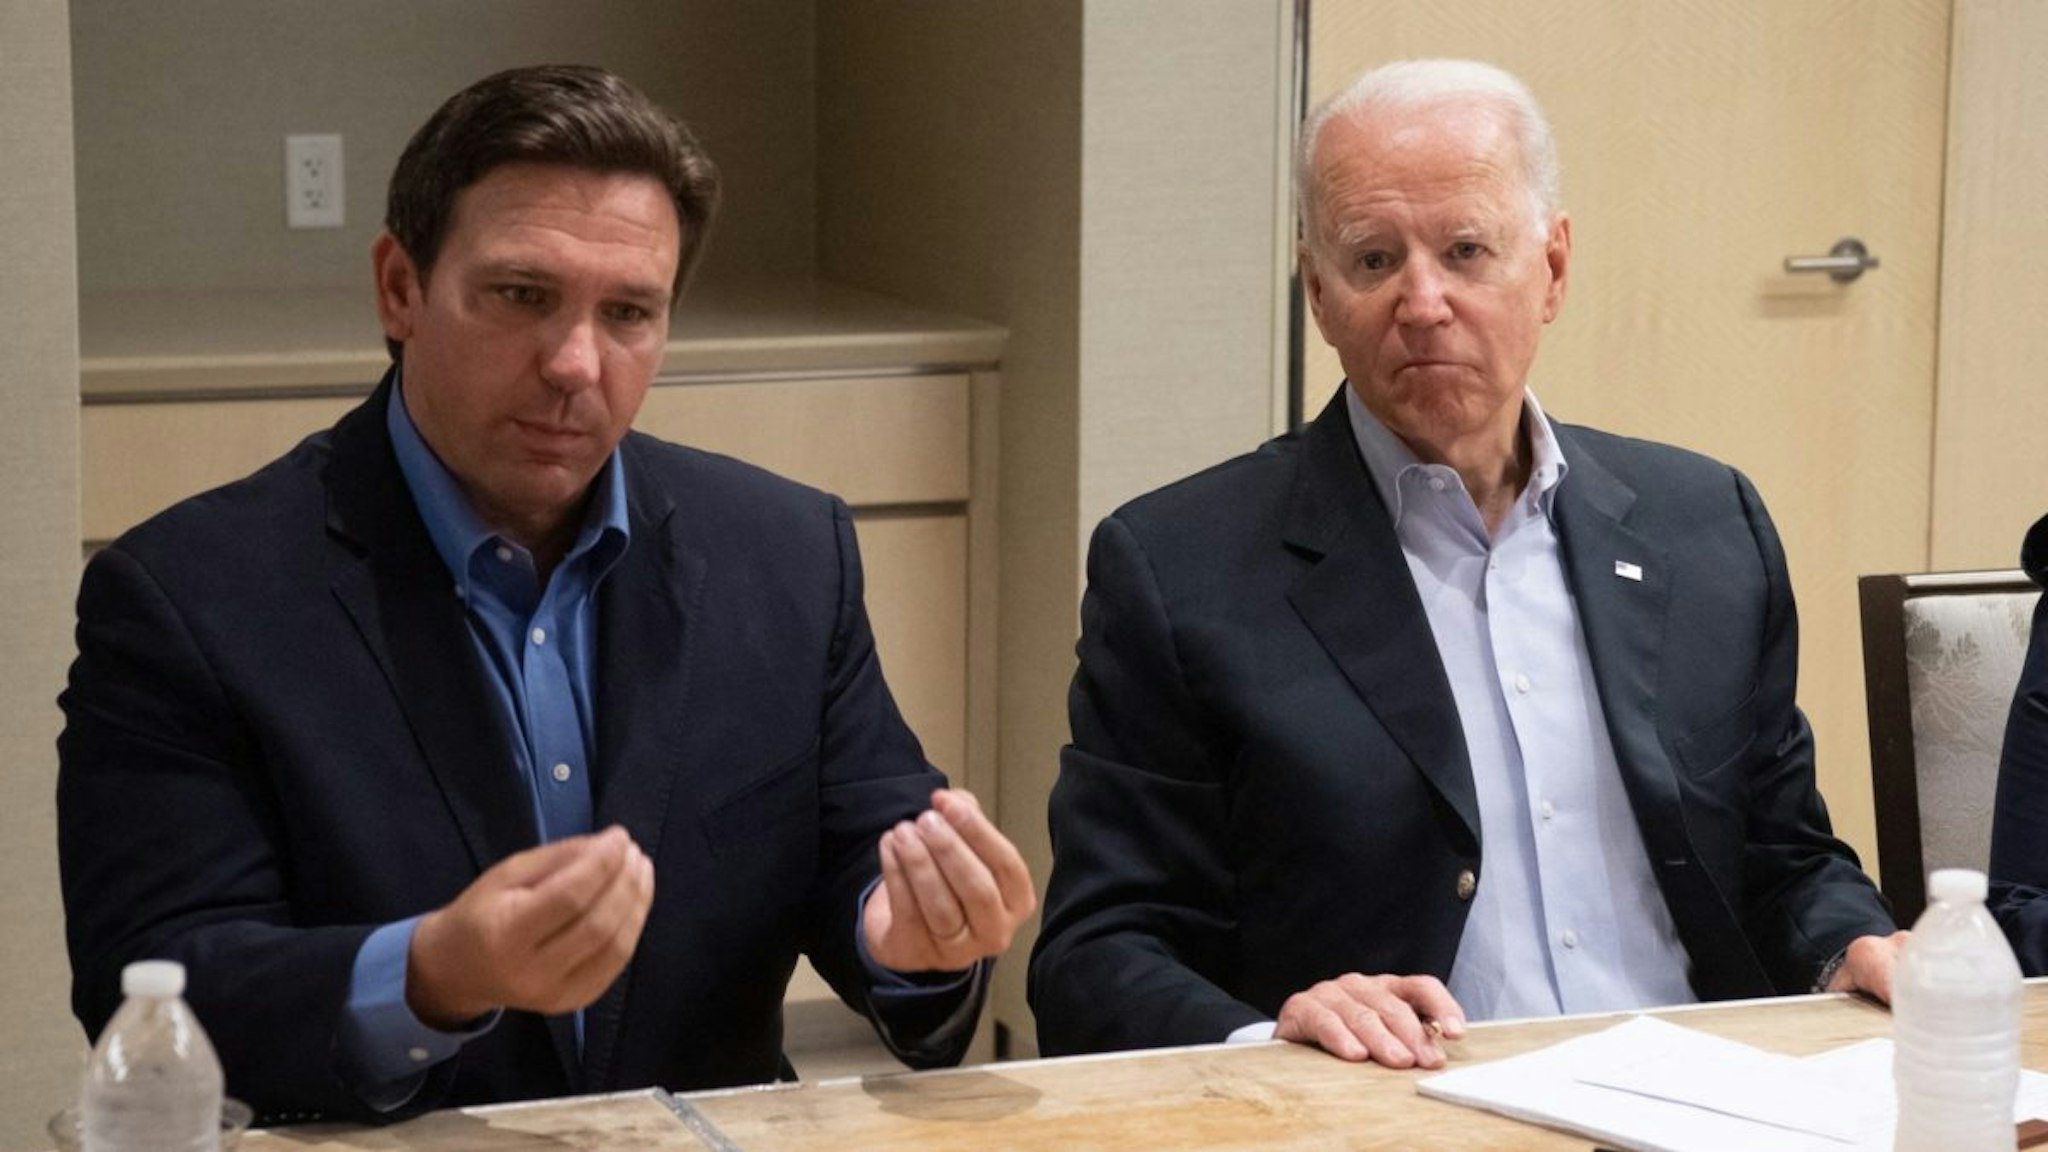 US President Joe Biden alongside Florida Governor Ron DeSantis (L) speaks about the collapse of the 12-story Champlain Towers South condo building in Surfside, during a briefing in Miami Beach, Florida, July 1, 2021.